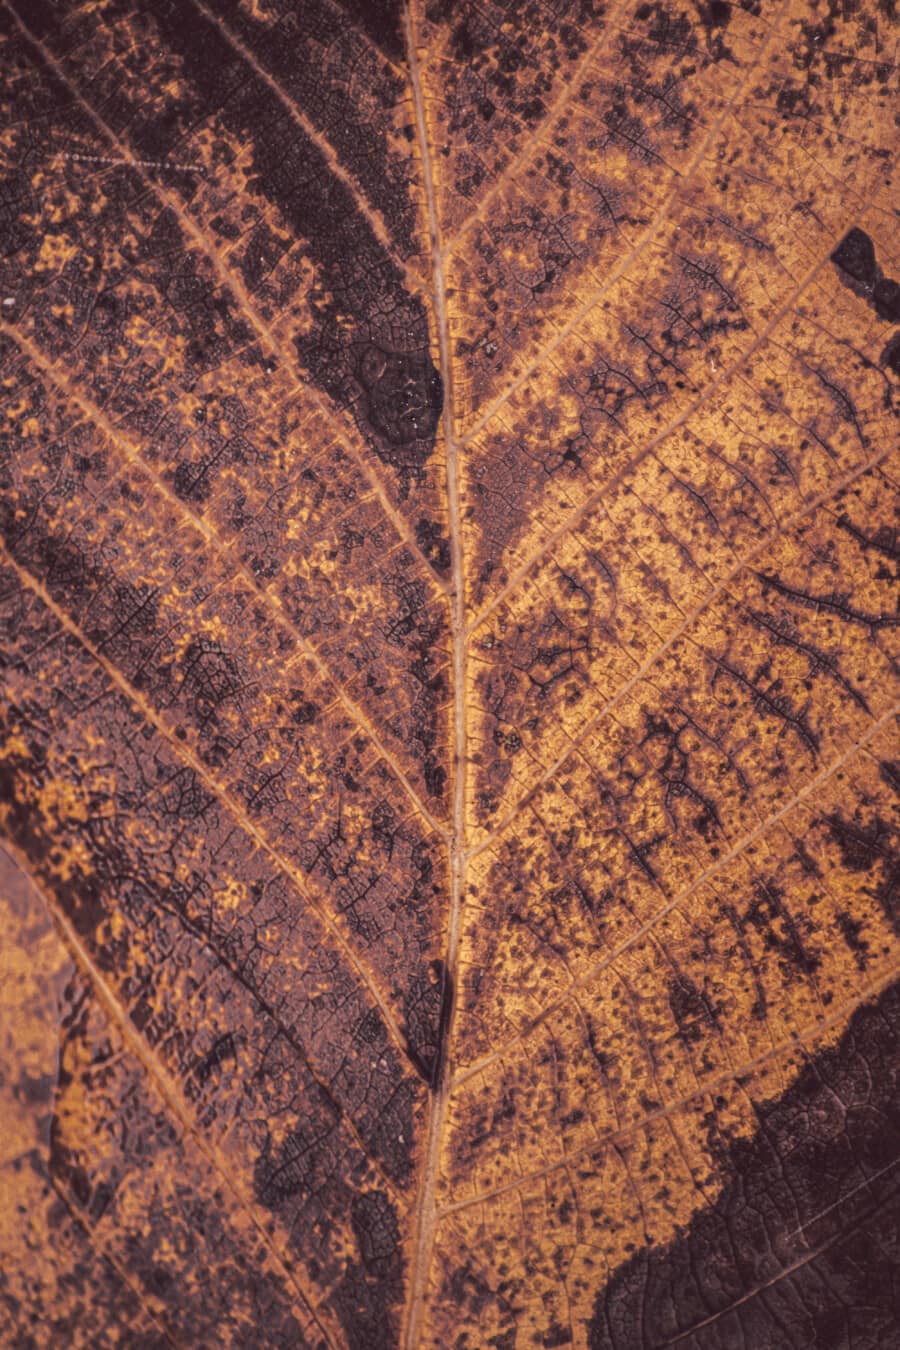 leaf, macro, close-up, dry, texture, pattern, upclose, color, brown, surface